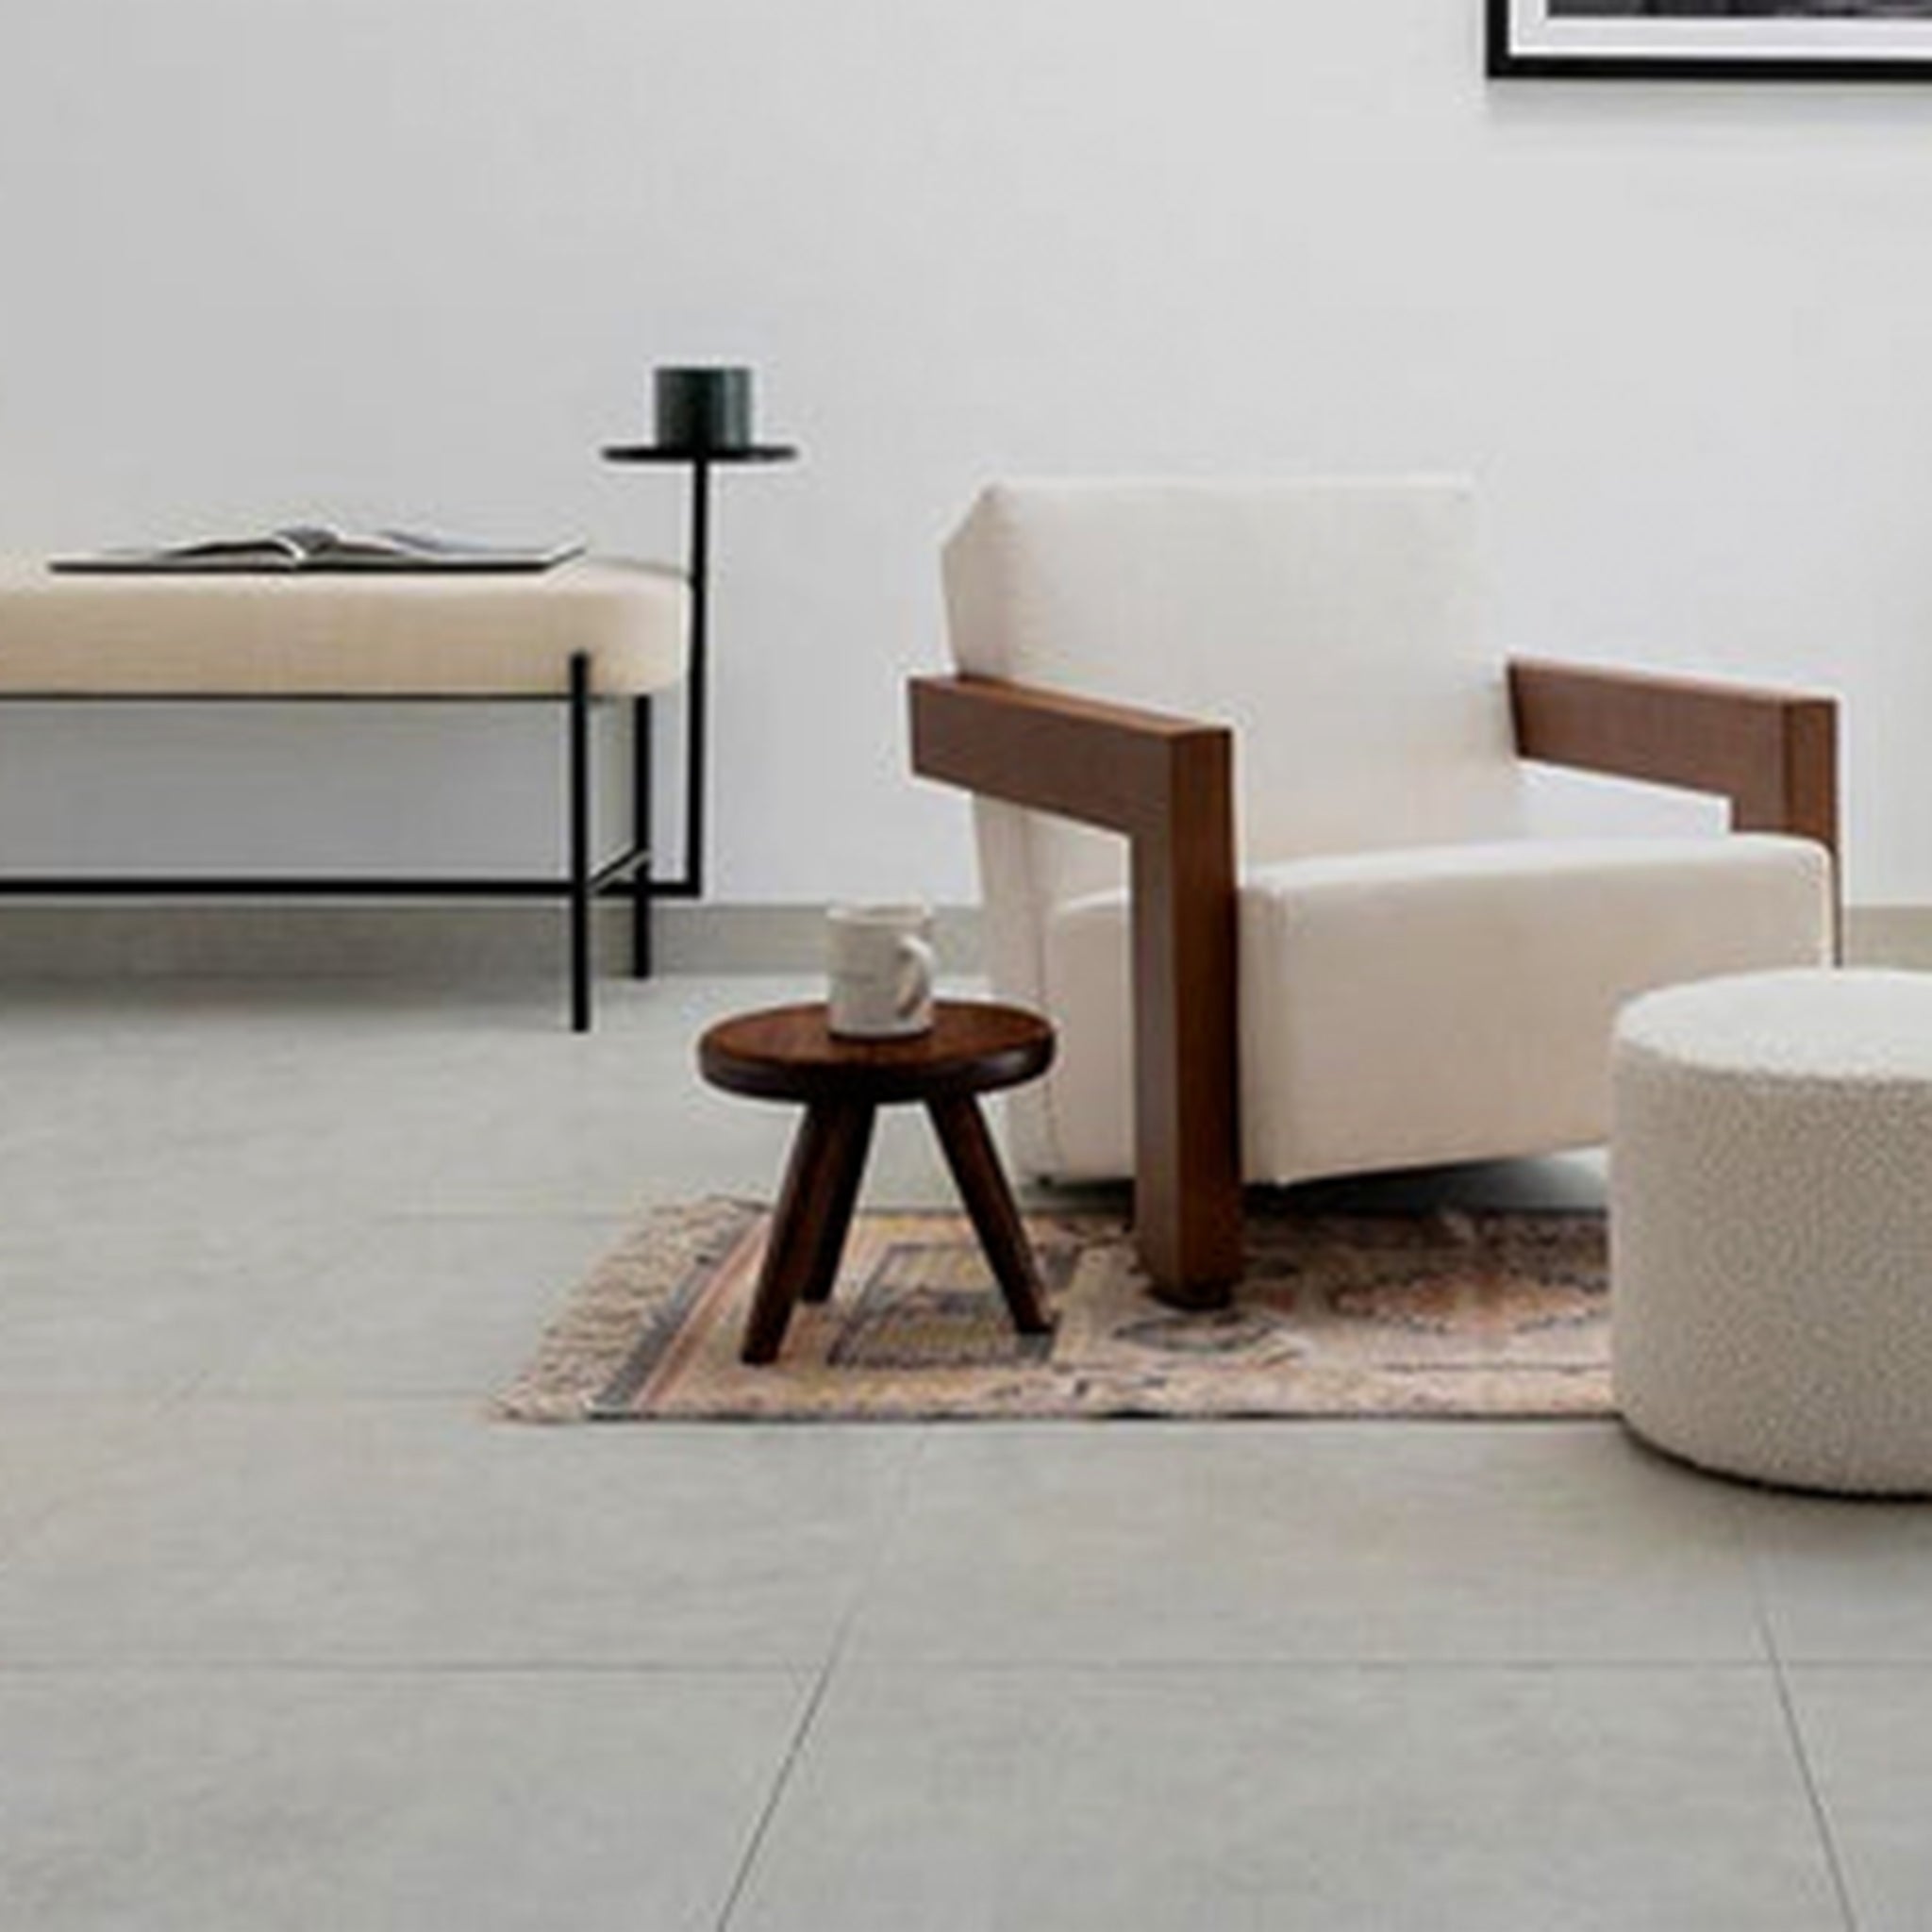 Modern living room with a white armchair, a wooden mini stool with a cup, a round pouf, and a minimalist bench